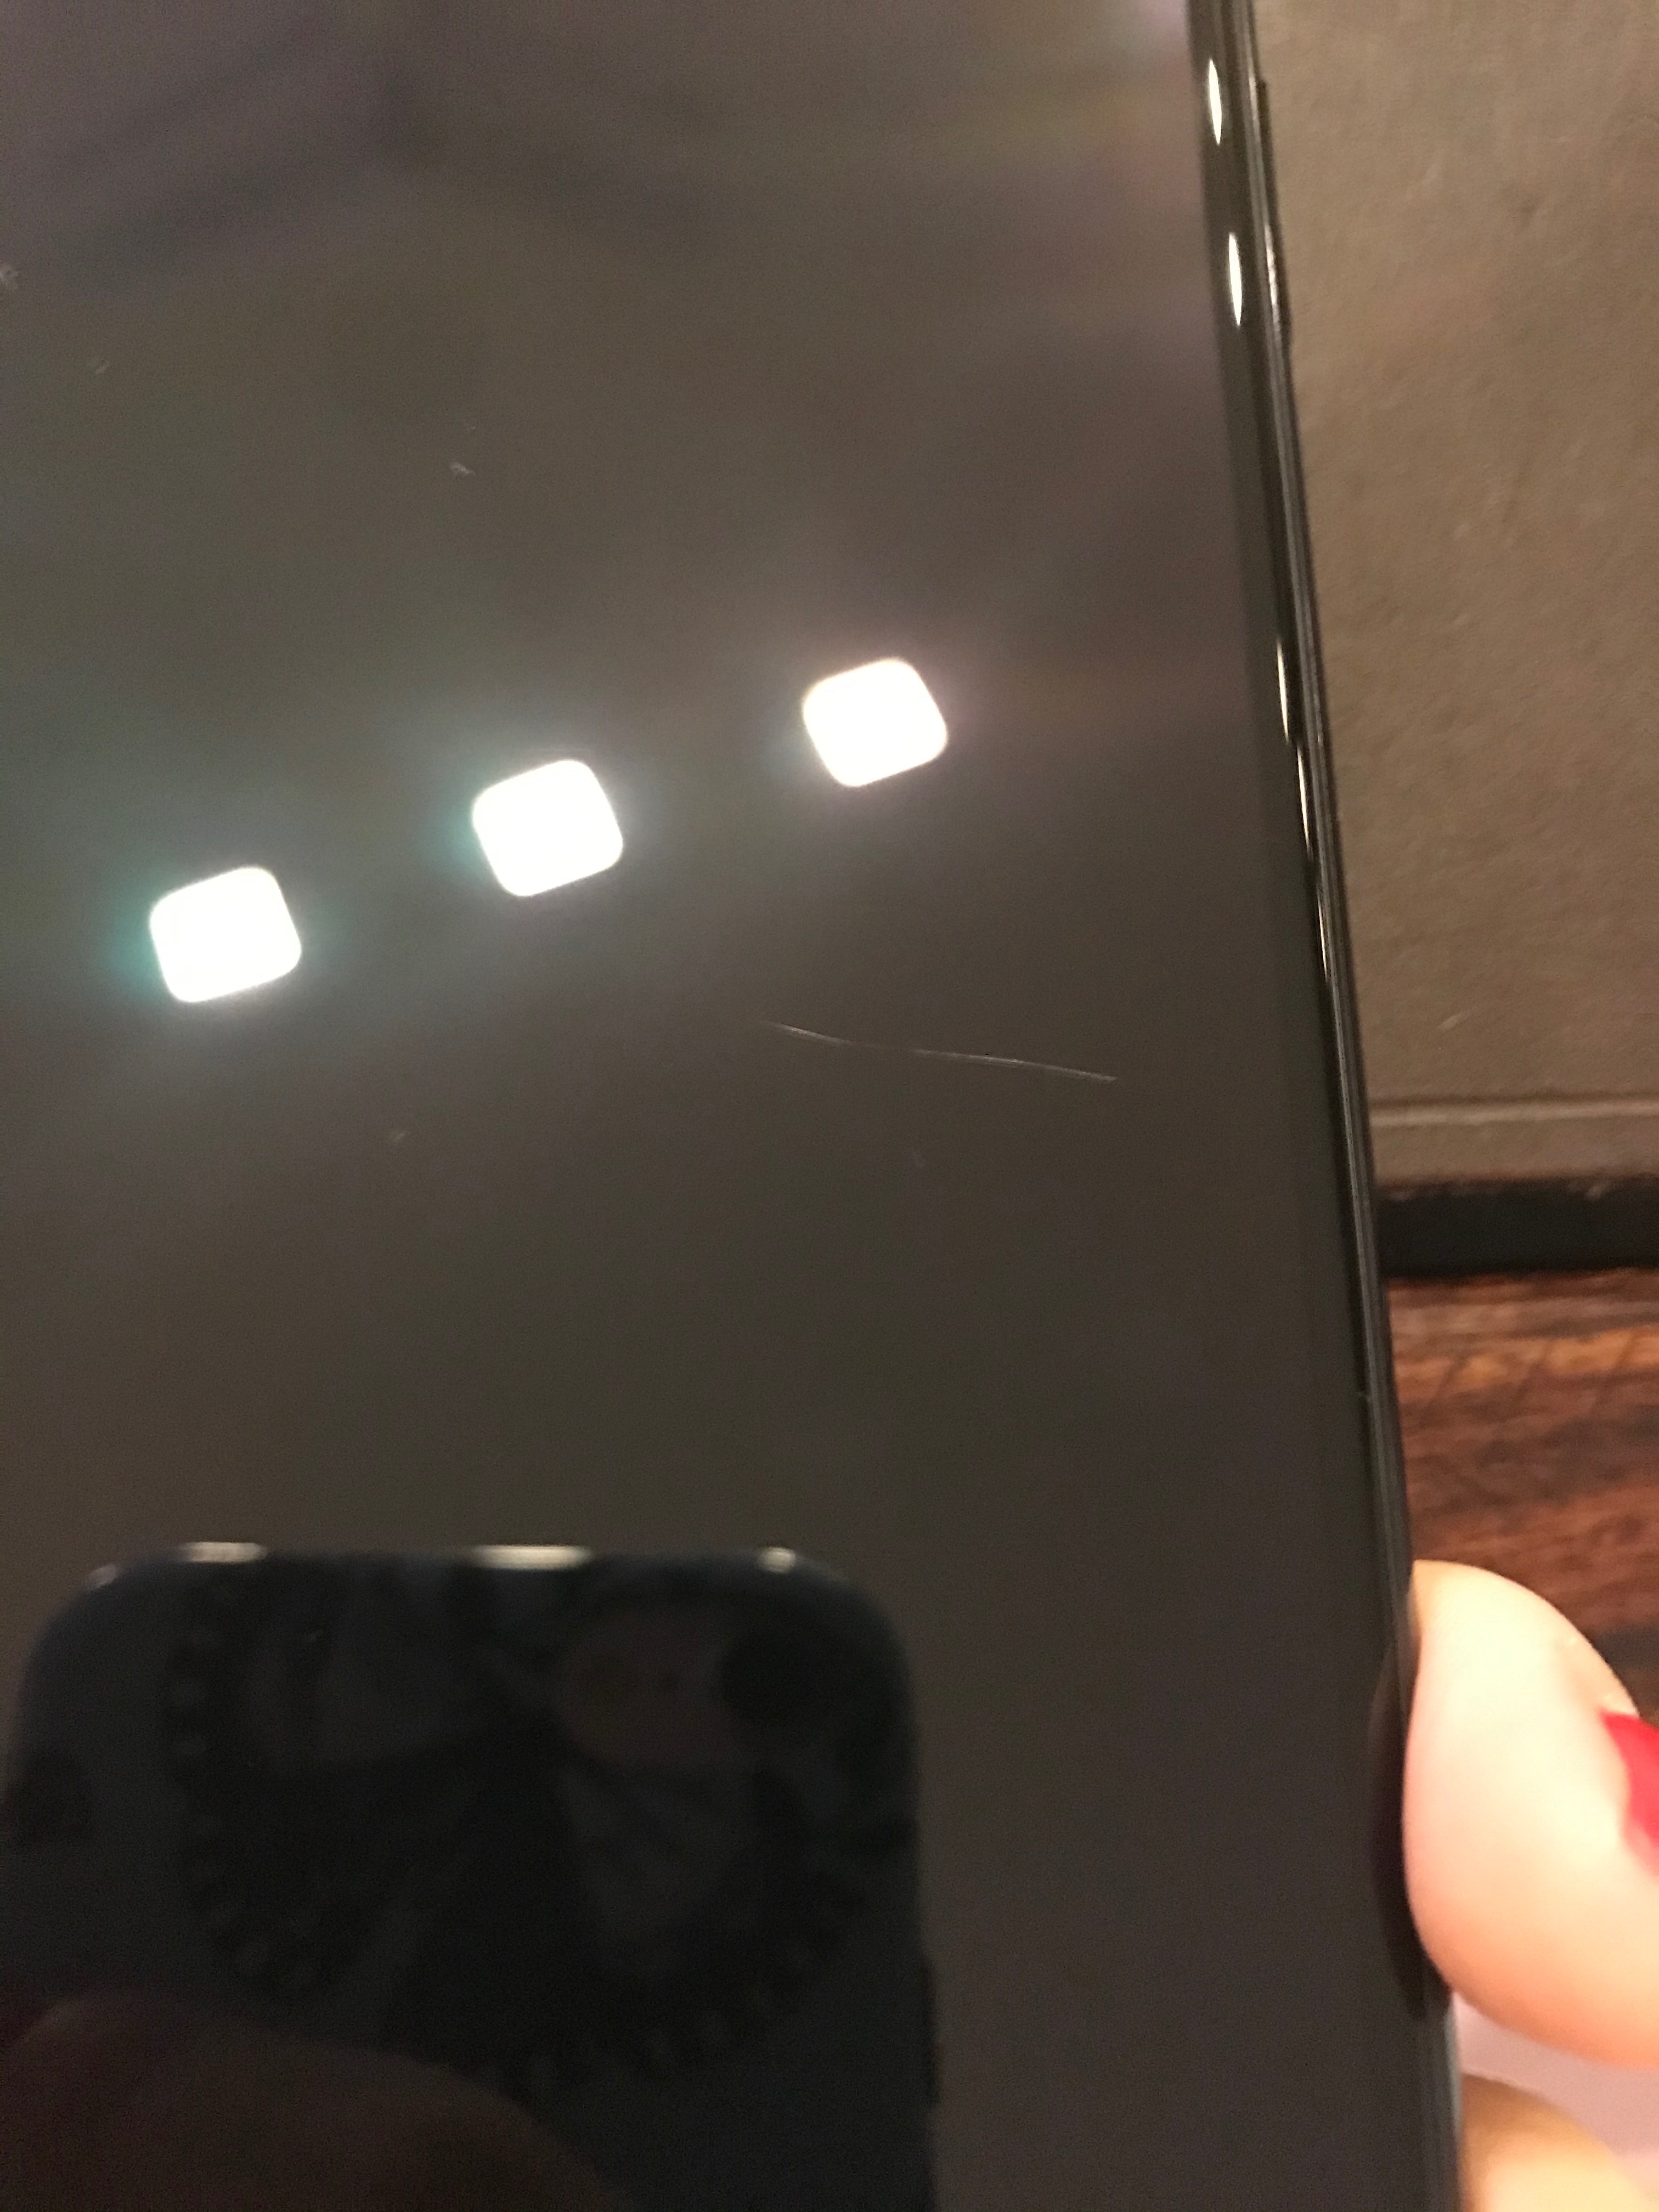 Why do Apple screens scratch so easily?